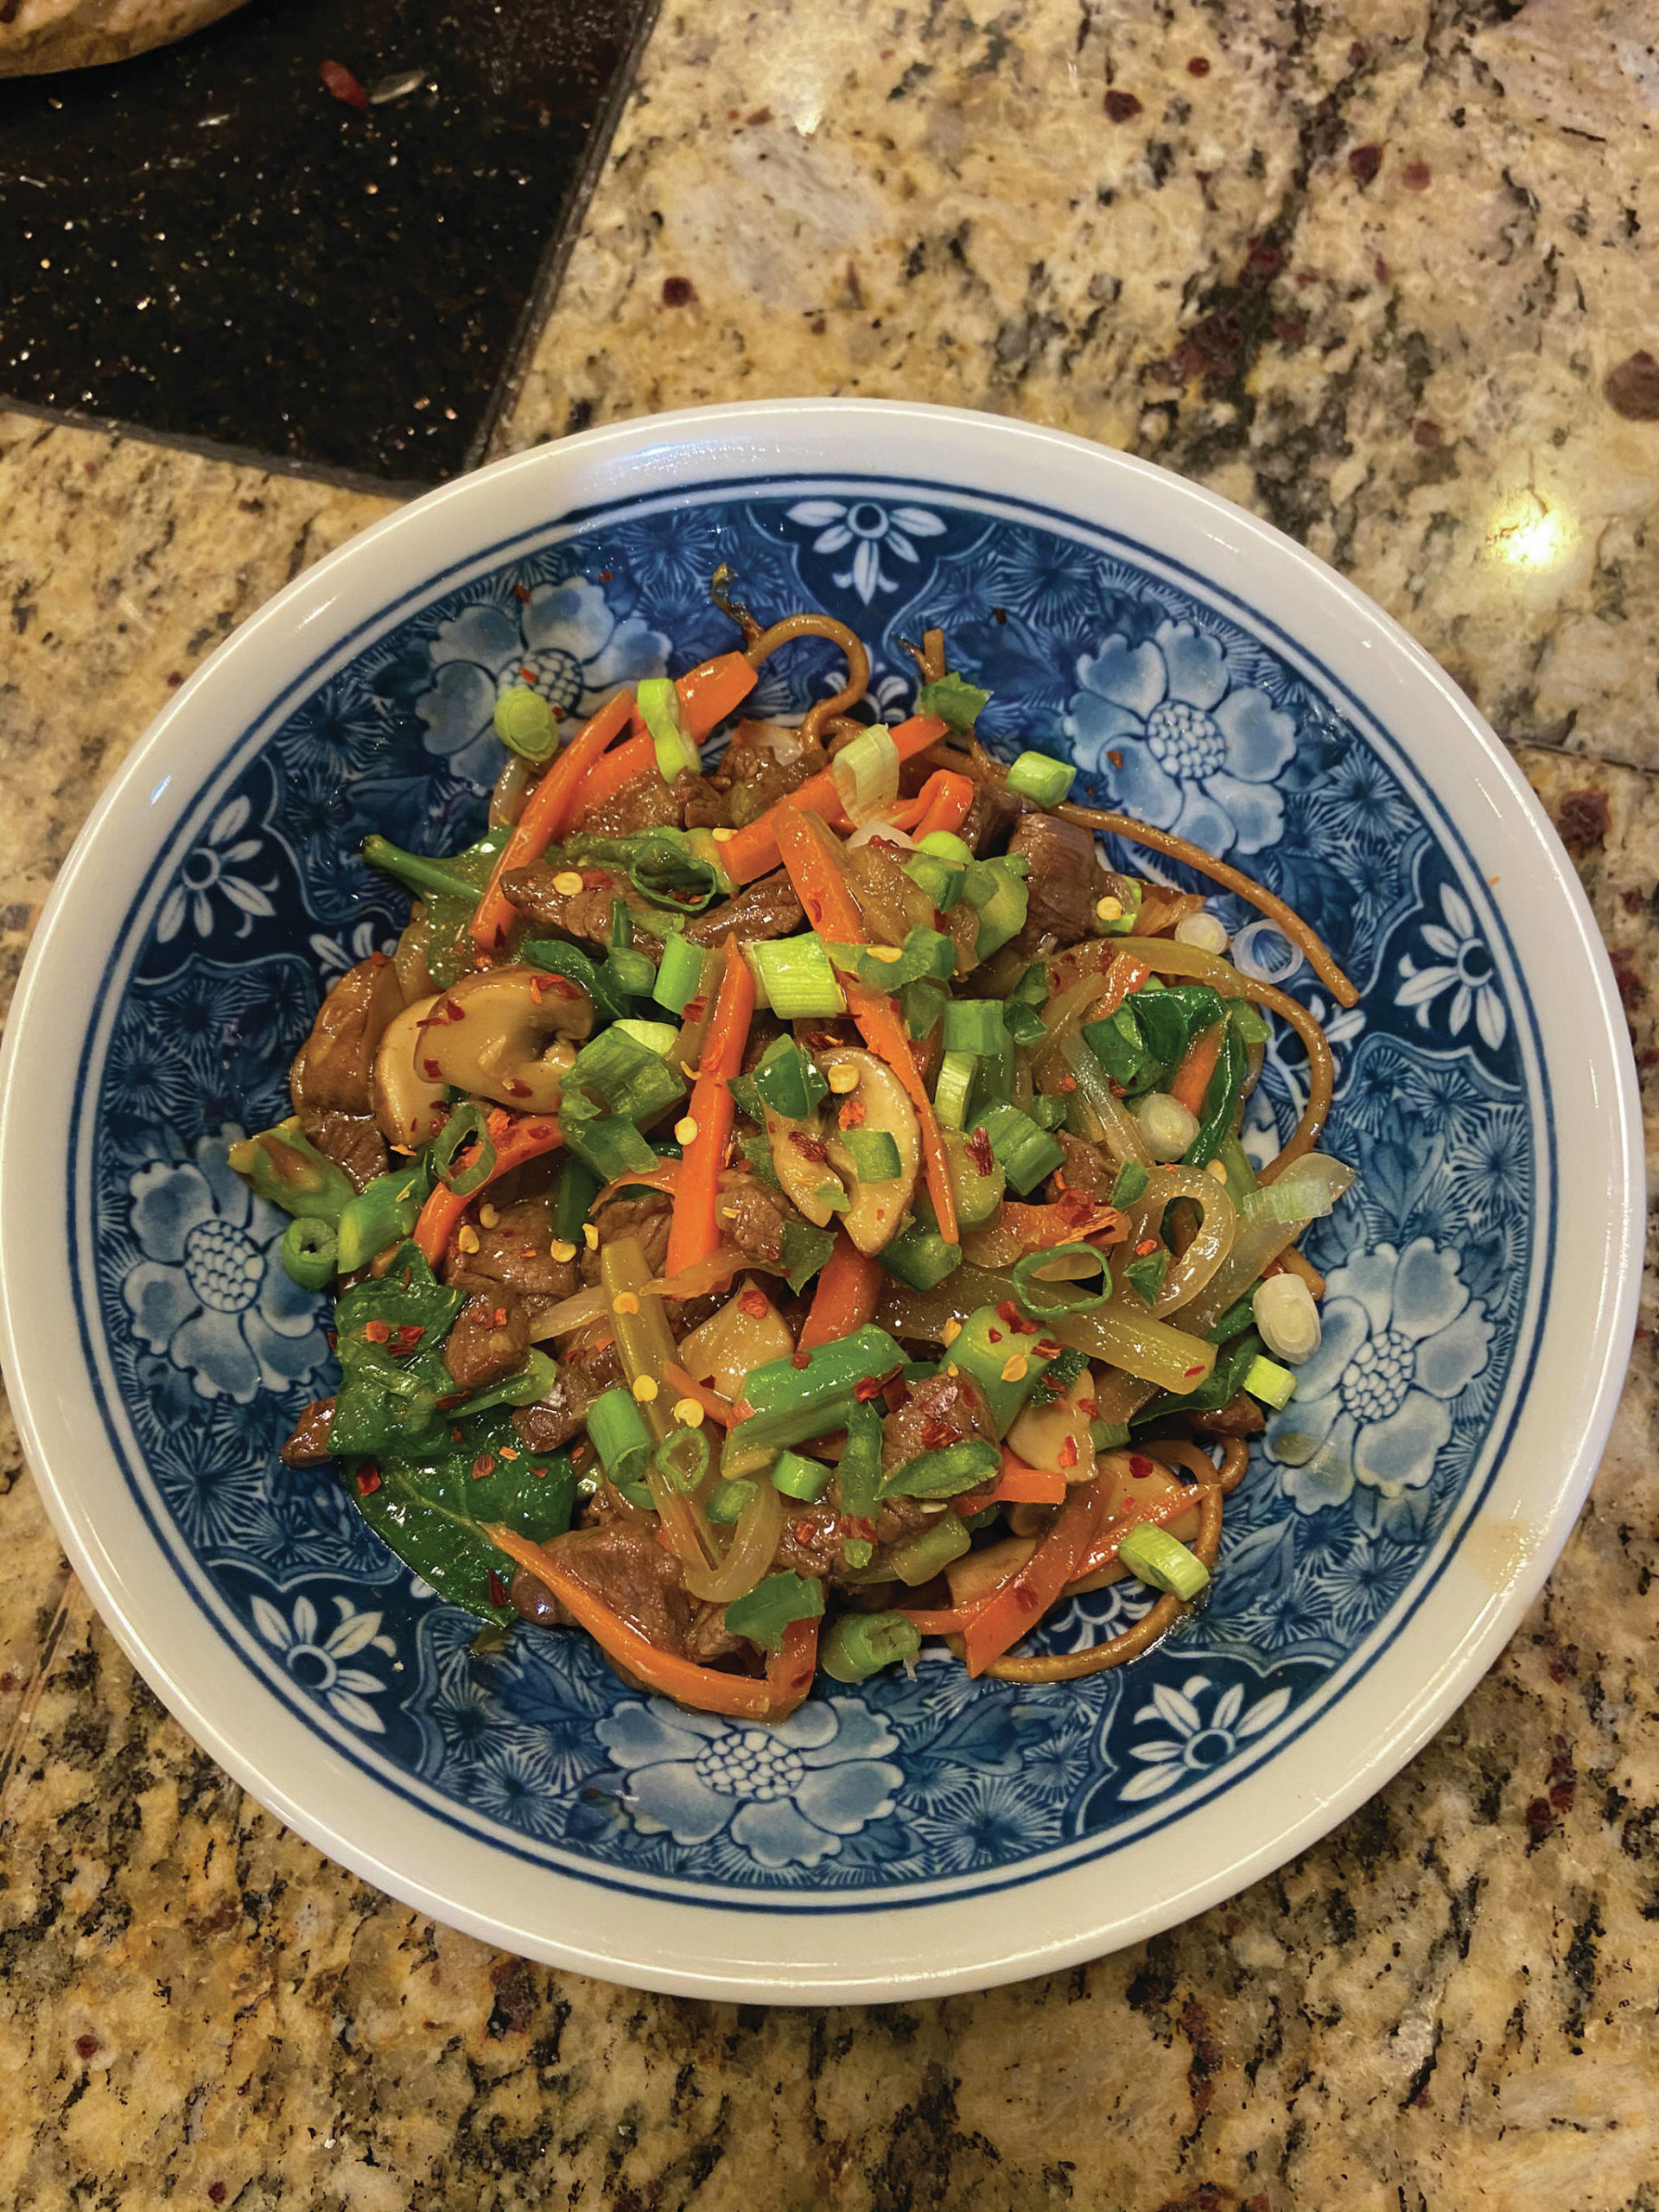 Teri Robl’s stir-fried spicy moose is adapted from a recipe by Barbara Tripp, as seen here in a meal made on Jan. 13, 2020, in Robl’s Homer, Alaska, kitchen. (Photo by Teri Robl)